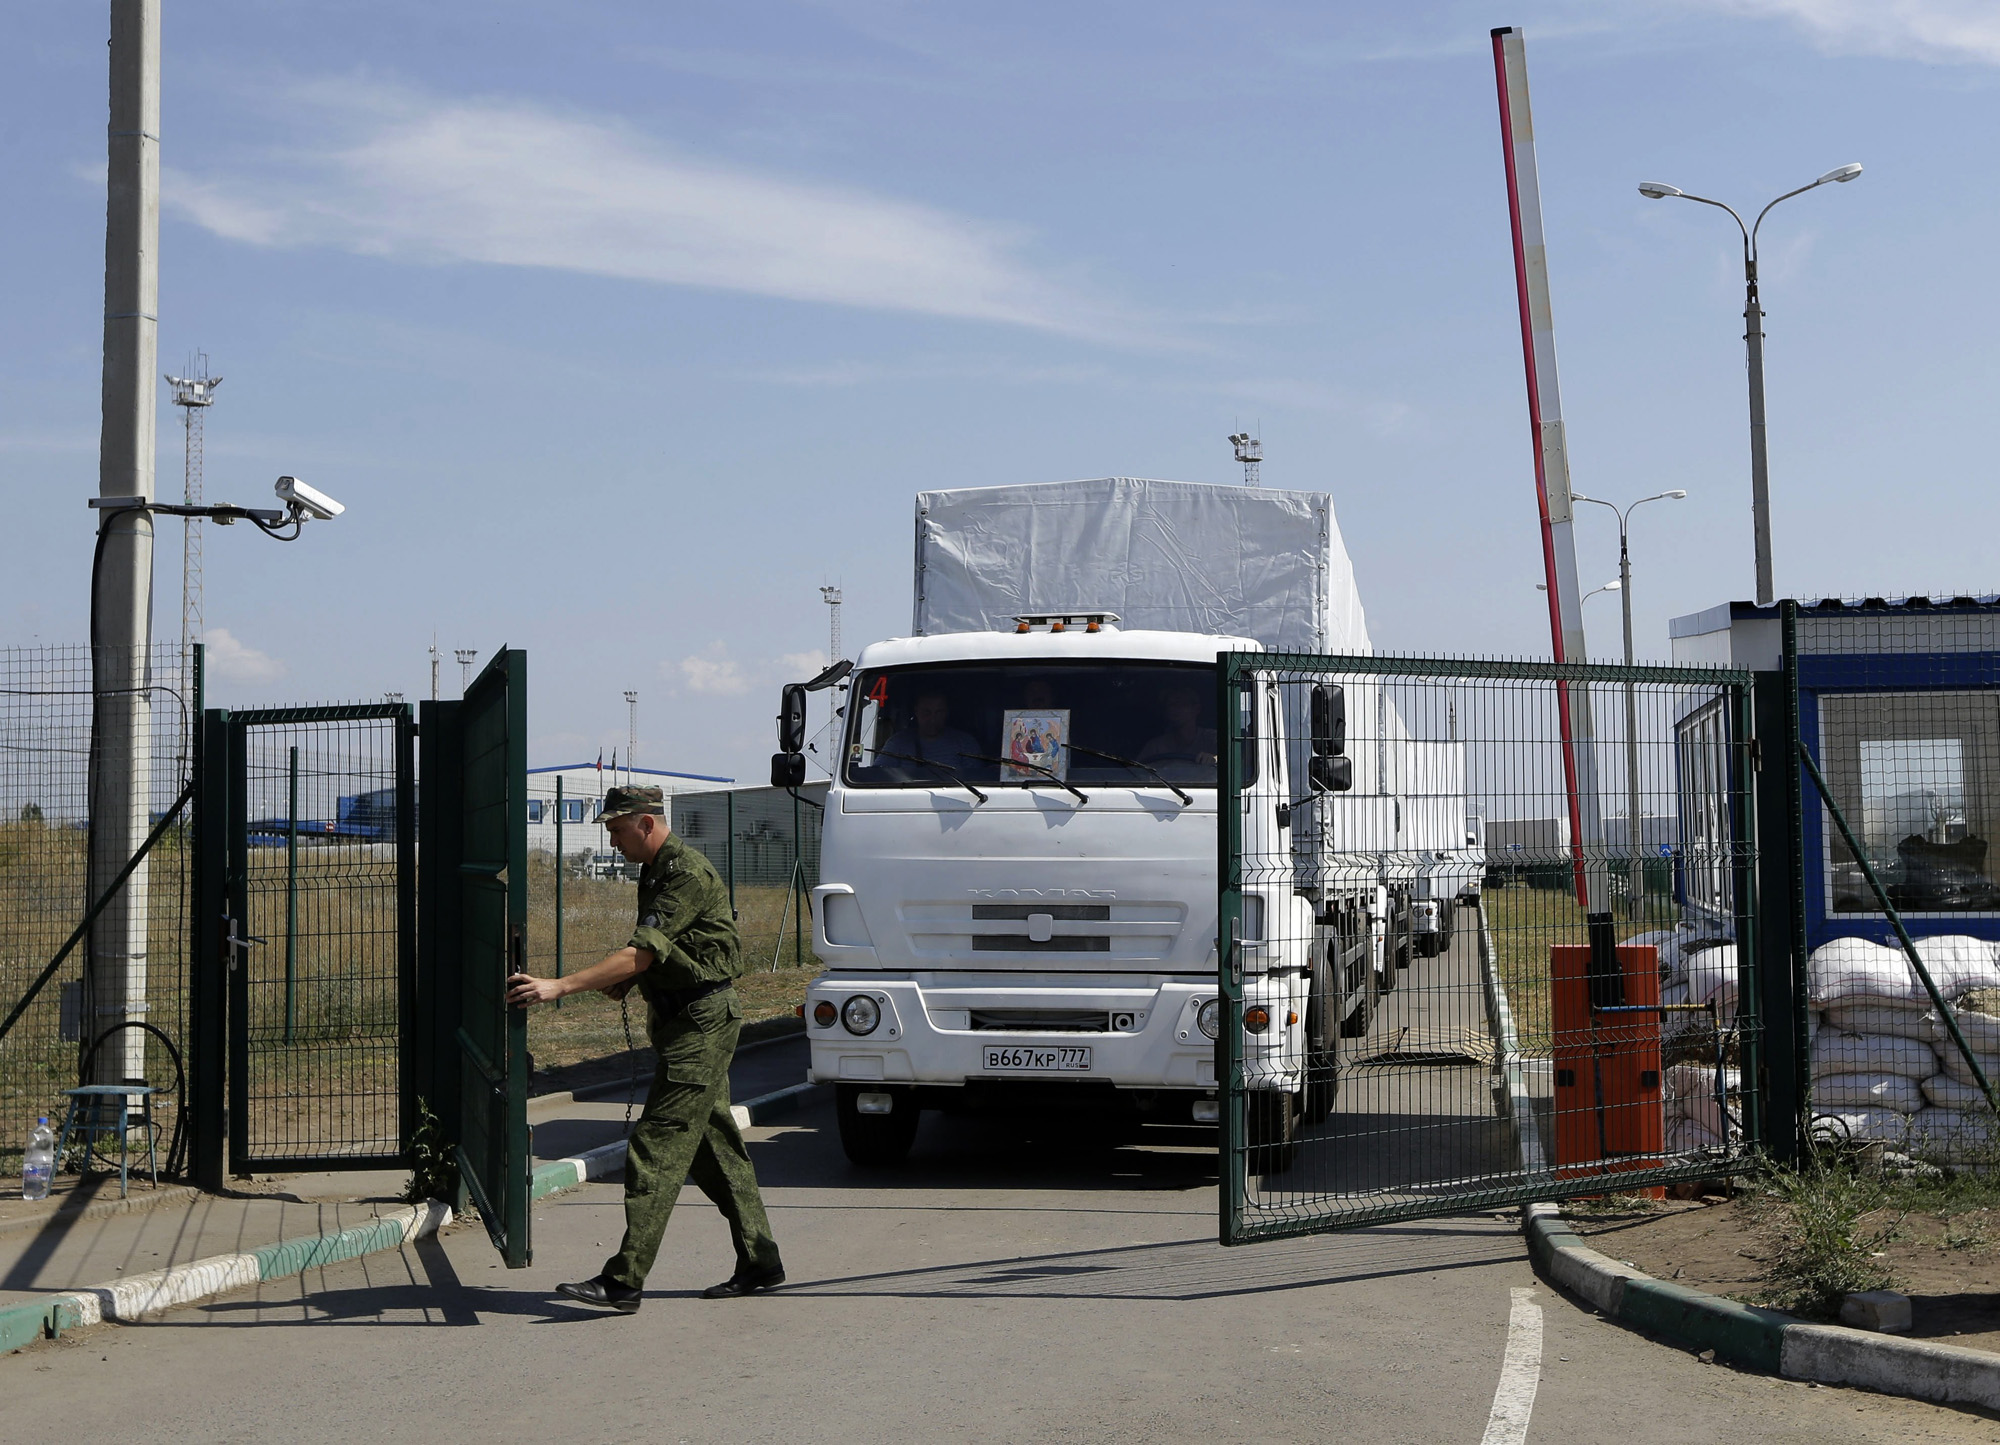 A Russian border guard opens a gate into the Ukraine for the first trucks heading into the country from the Russian town of Donetsk, Rostov-on-Don region, Russia,  Aug. 22, 2014. (Sergei Grits—AP)